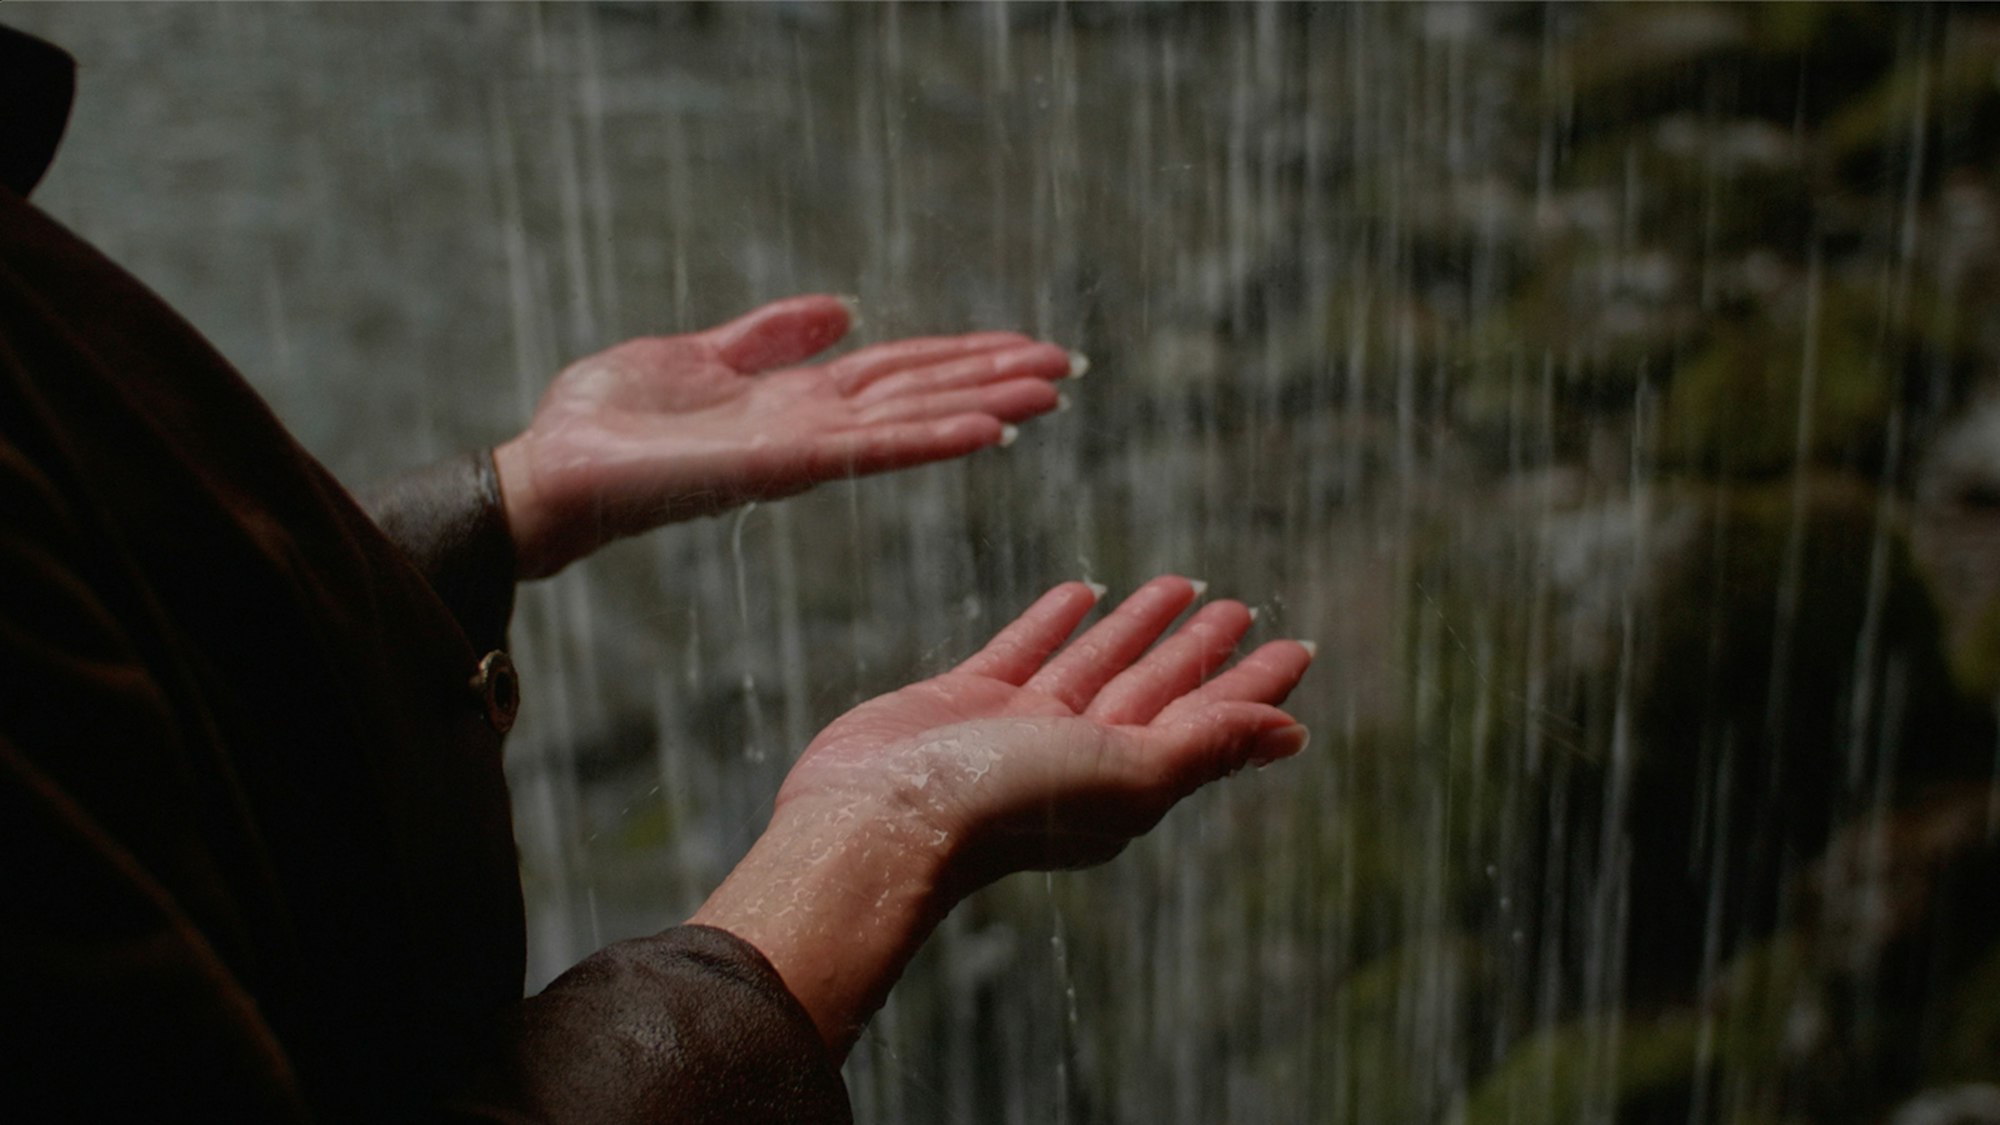 Video still of two hands with palms facing upwards as water falls on them.